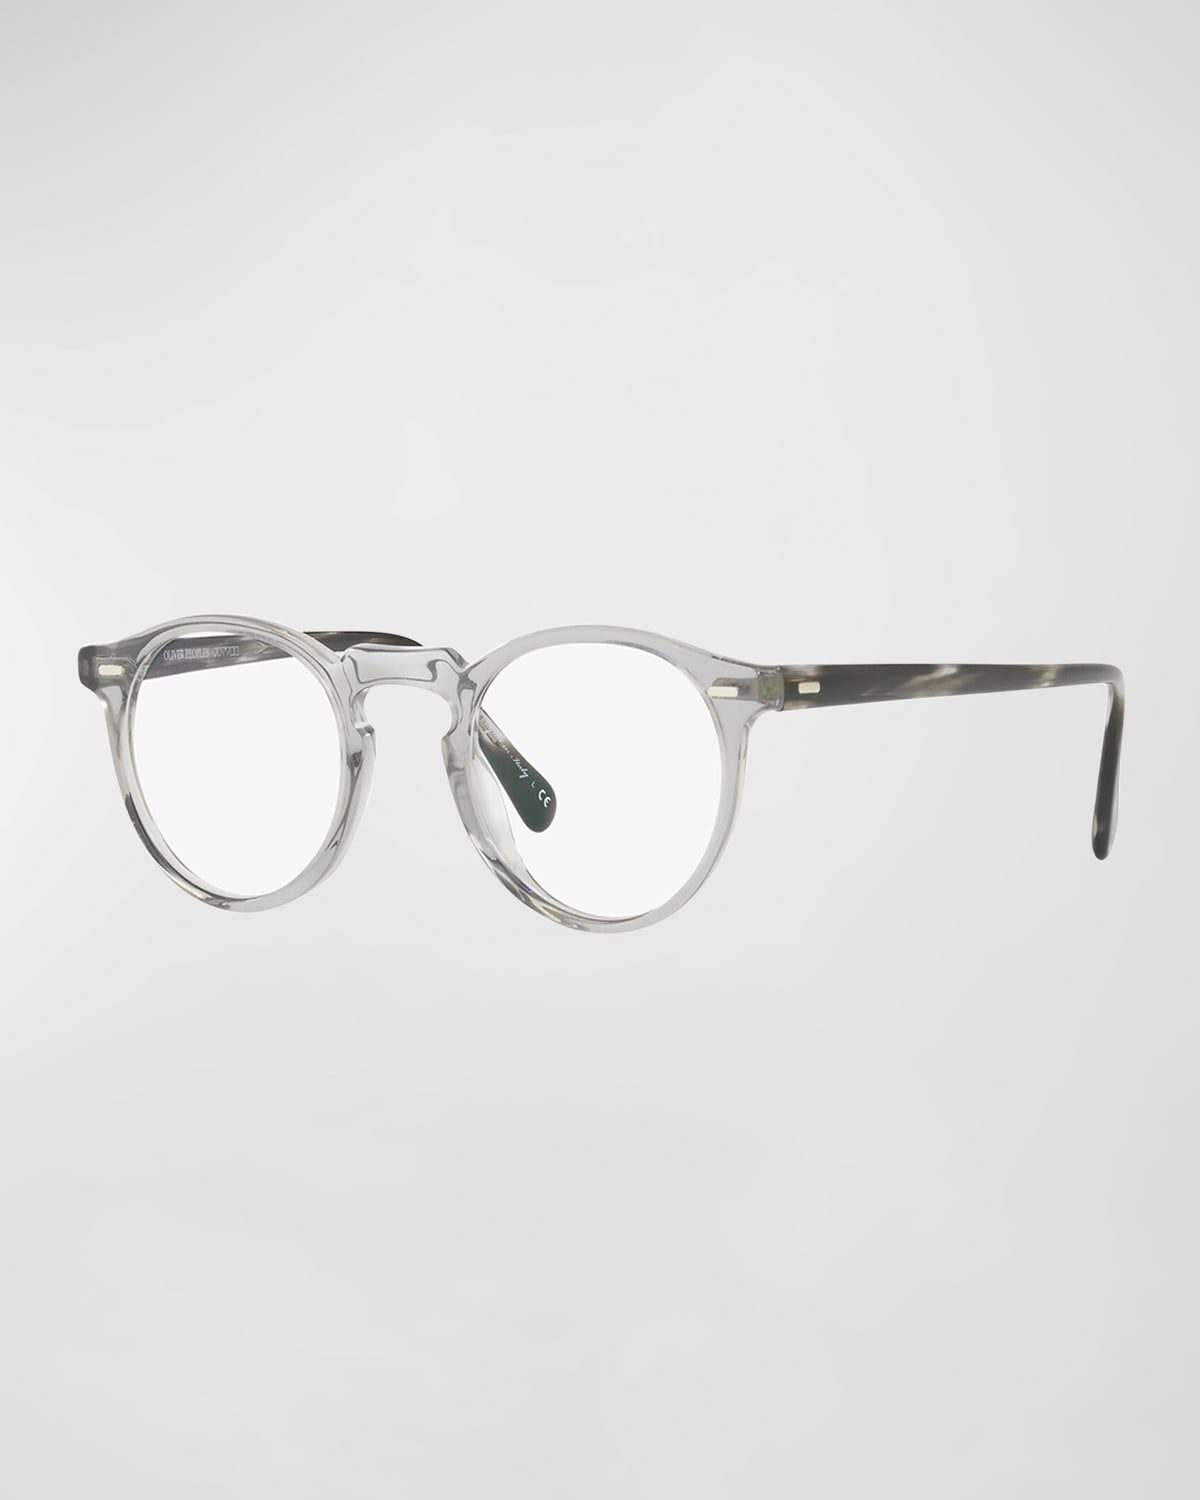 OLIVER PEOPLES GREGORY PECK ROUND ACETATE OPTICAL GLASSES